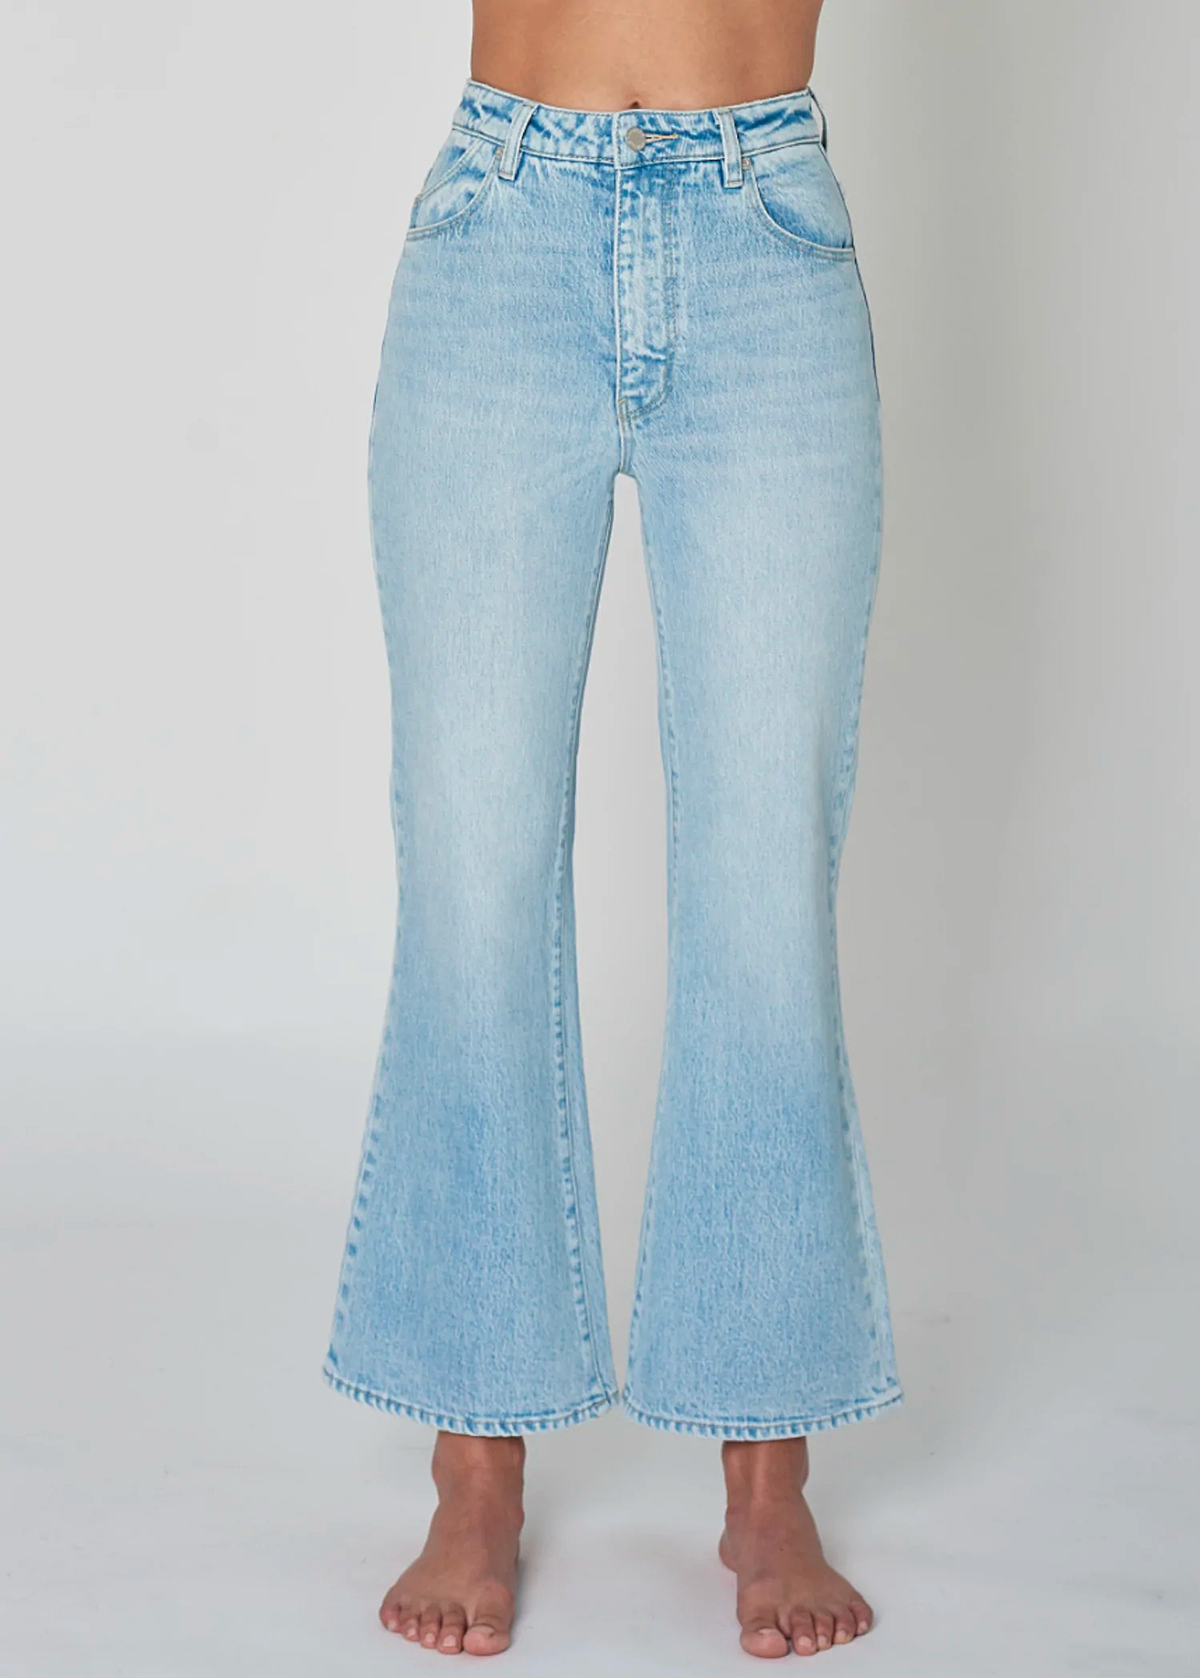 70s inspired bleach blue stretch denim crop ankle length Eastcoast Flares with high rise waist by Rolla's Jeans